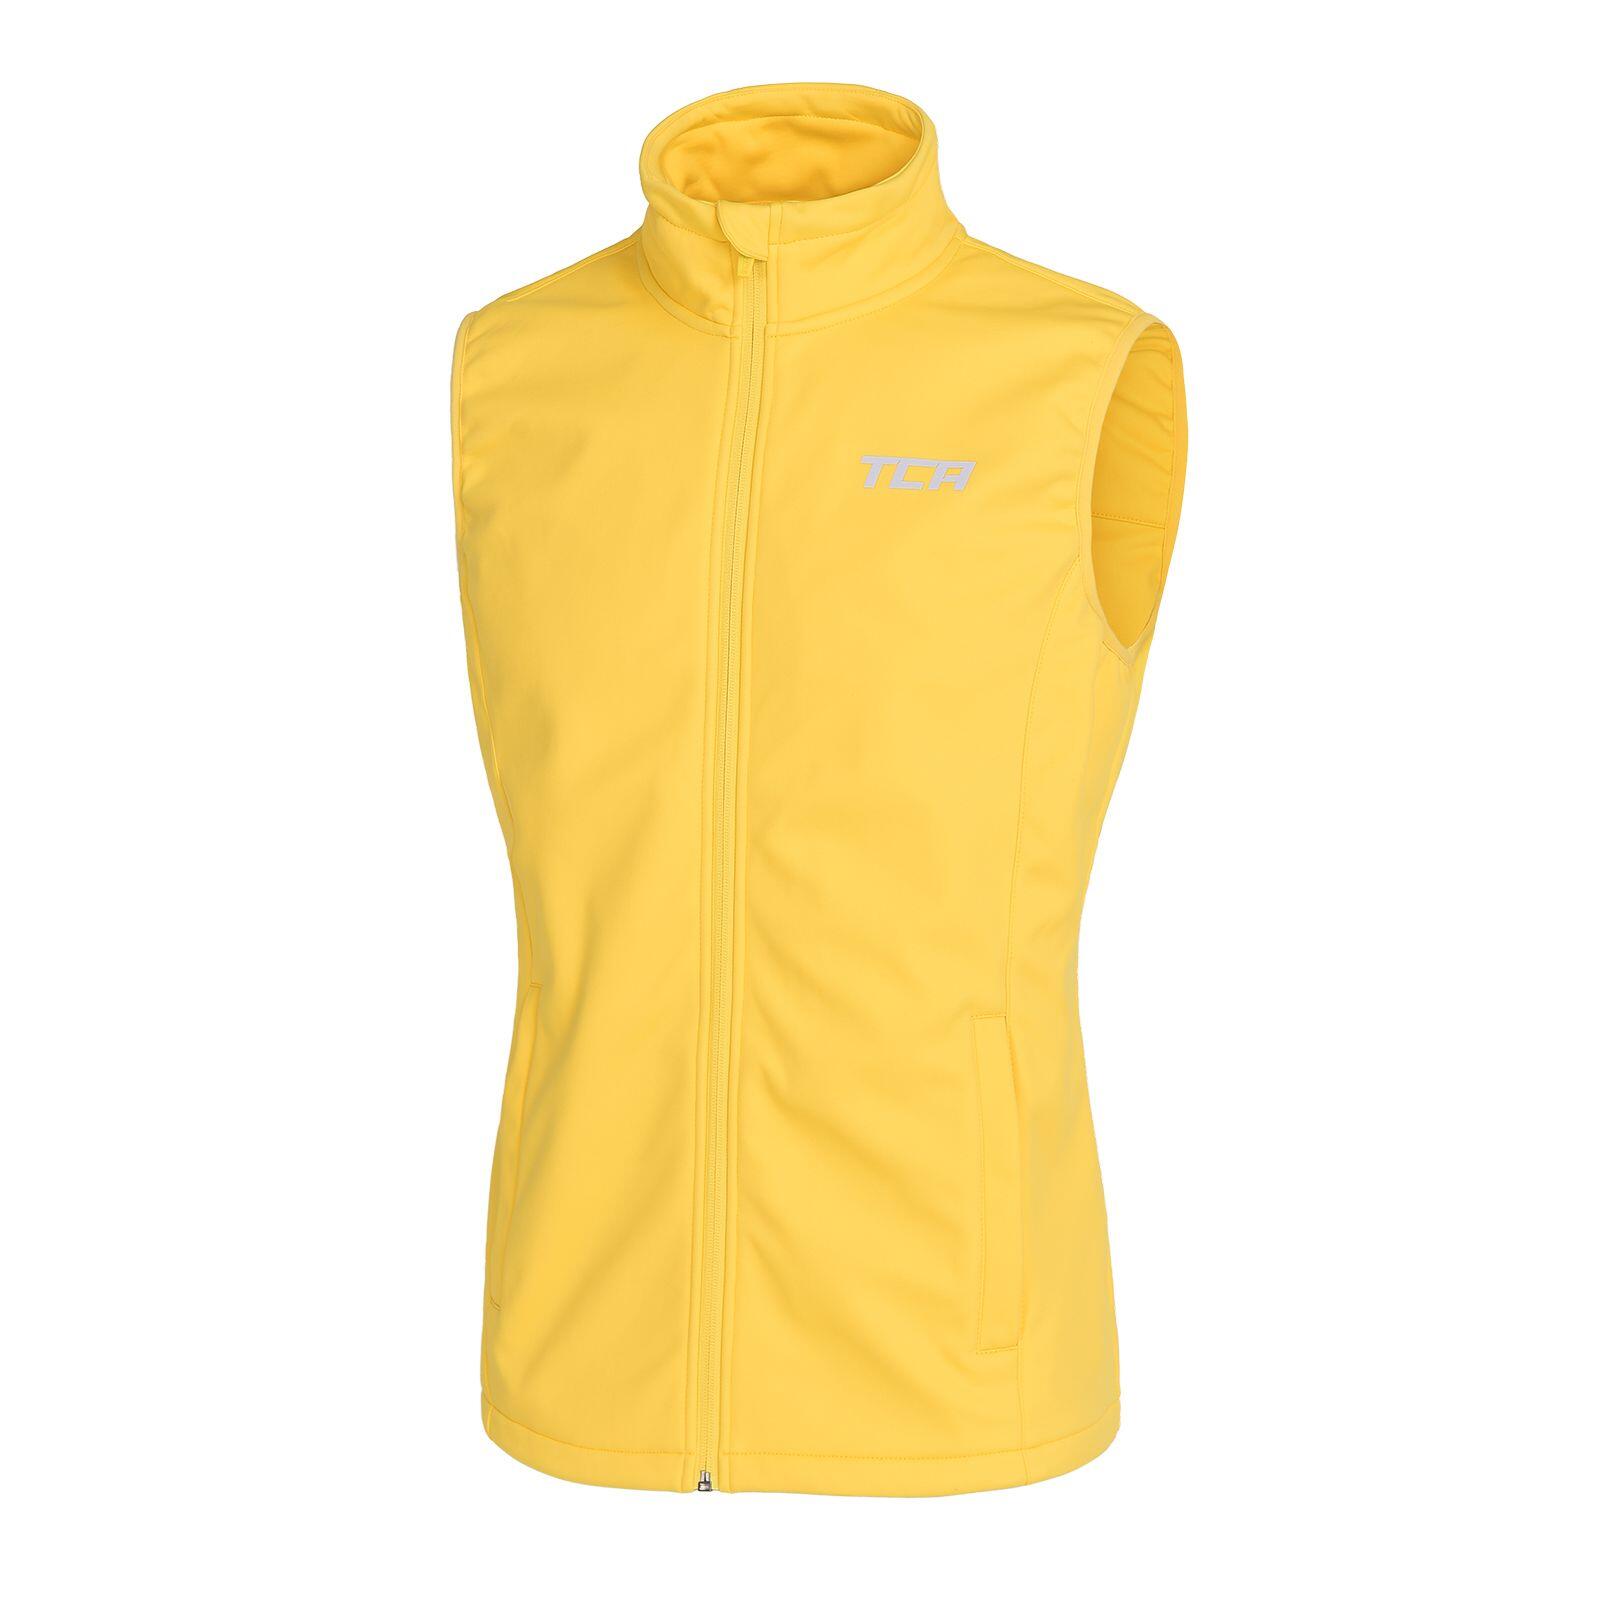 TCA Men's Flyweight Wind-Proof Gilet with Zip Pockets - Vibrant Yellow